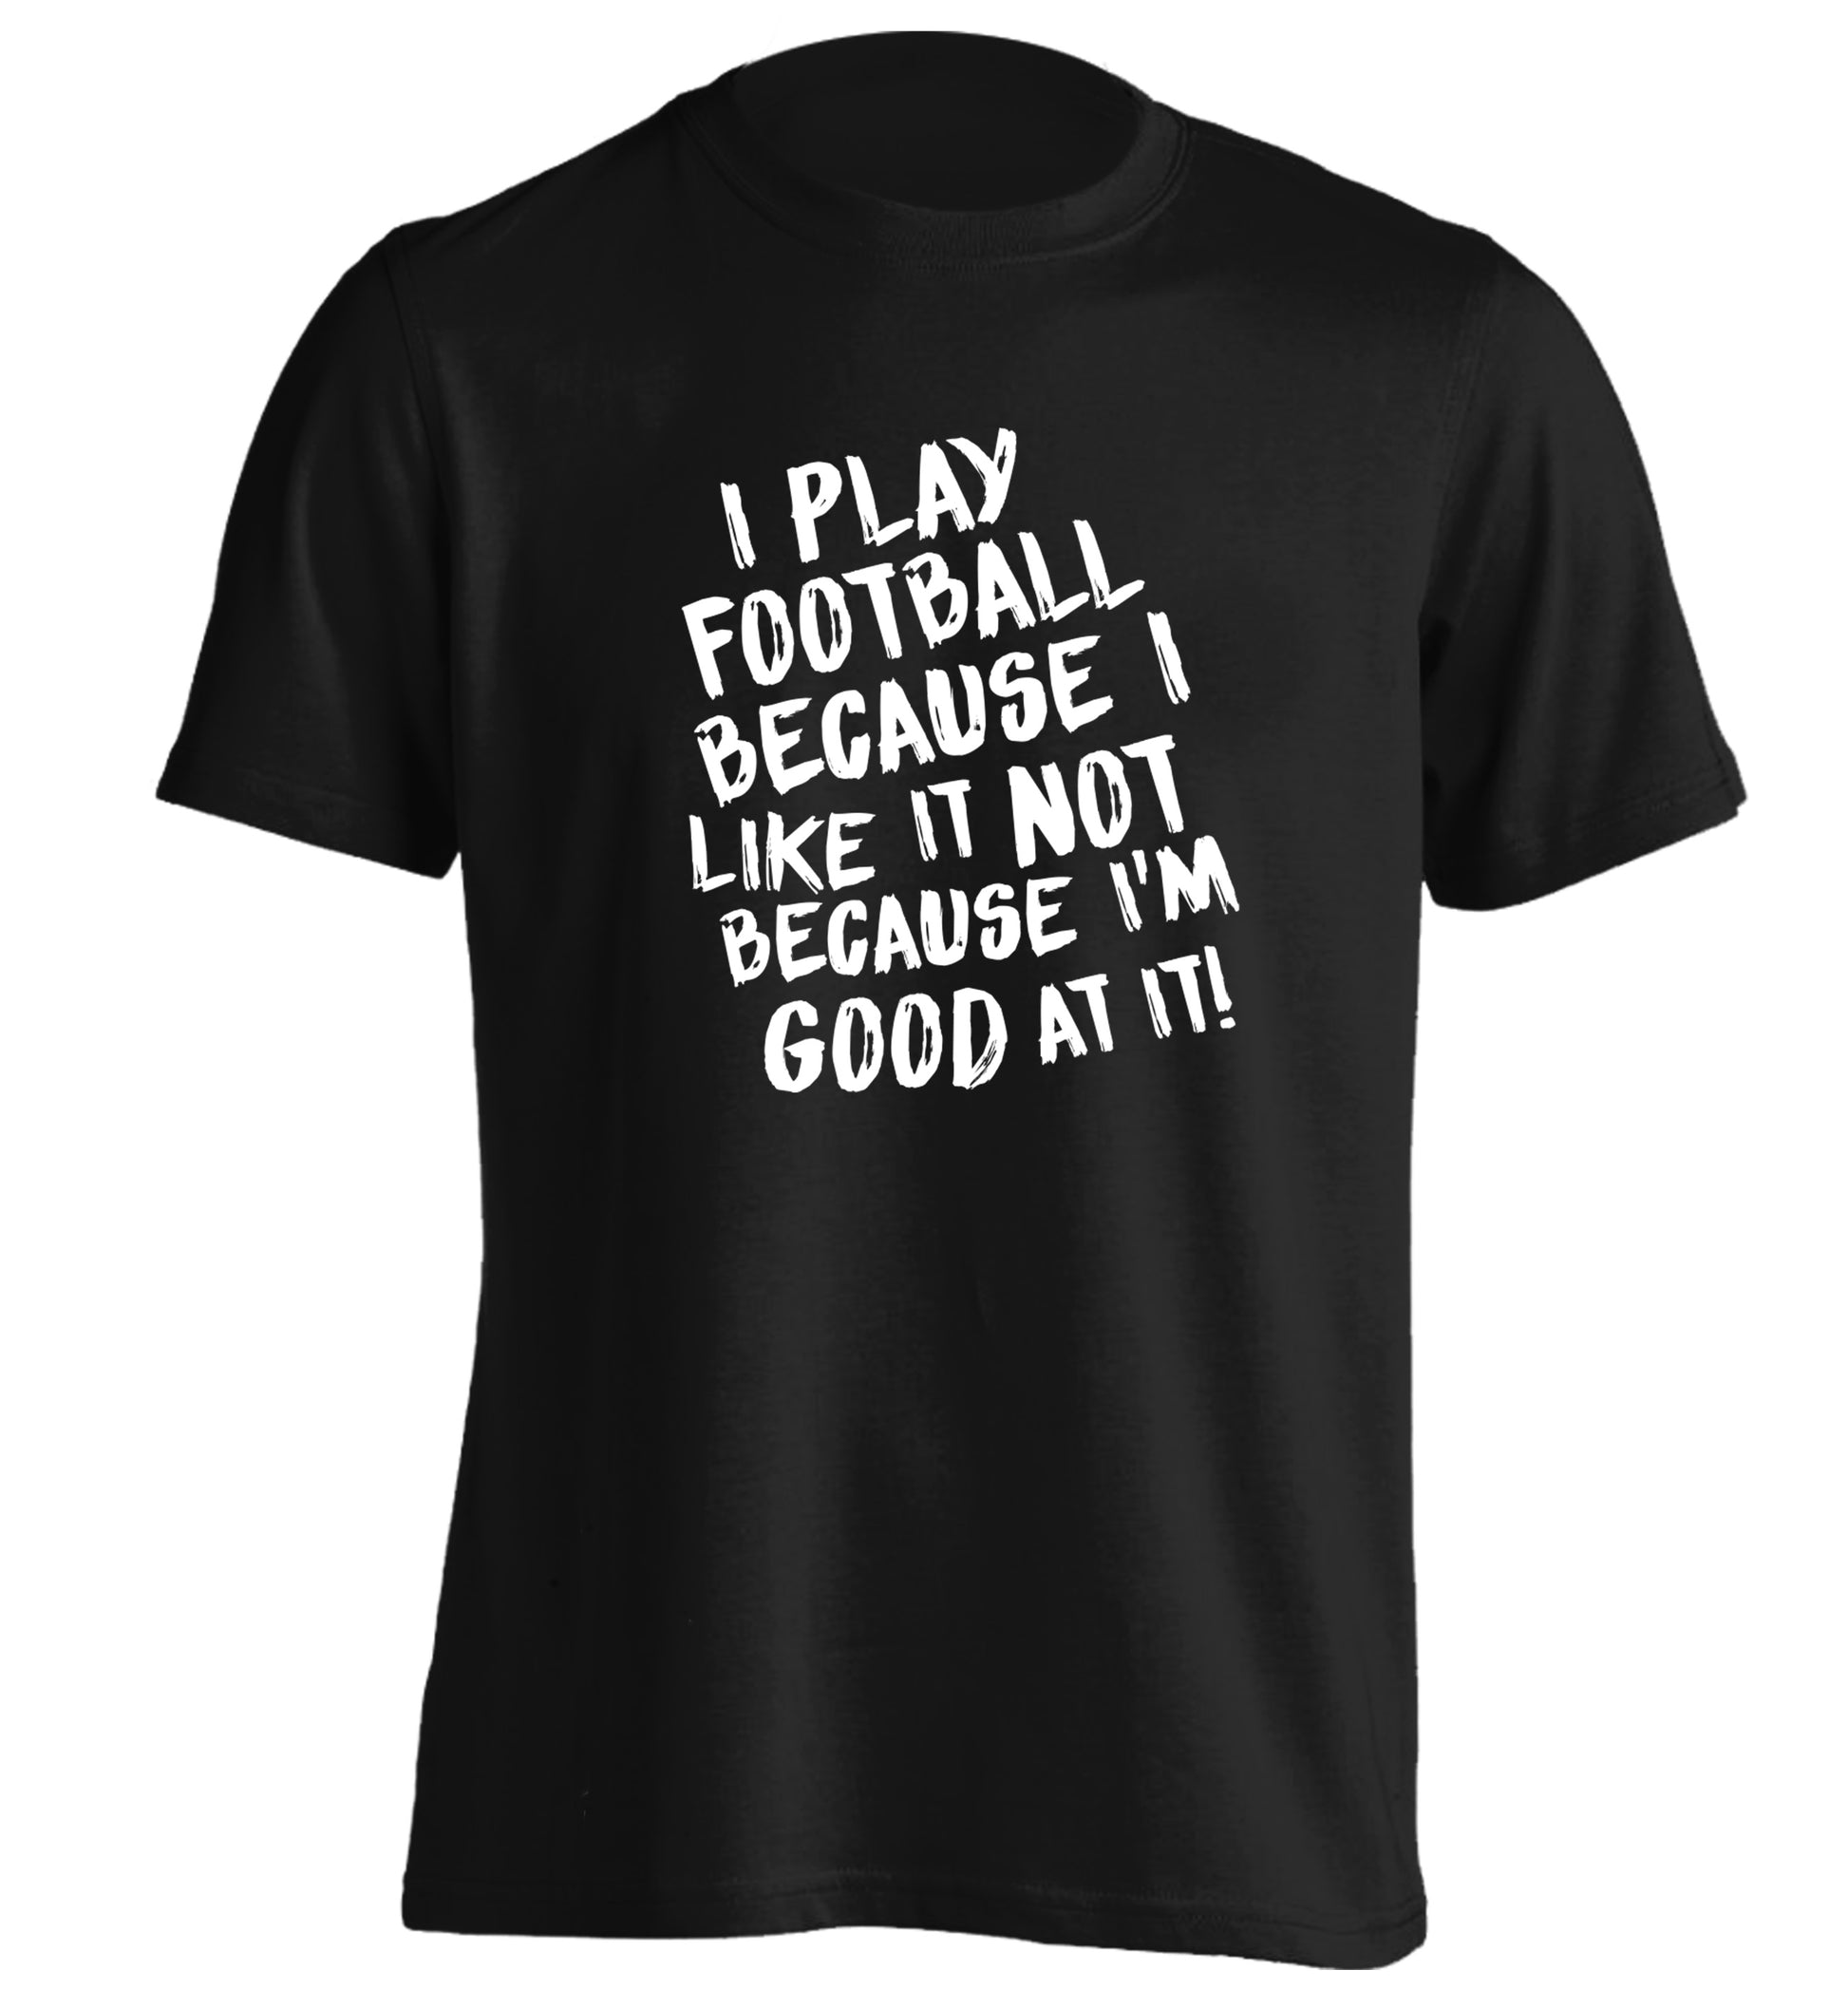 I play football because I like it not because I'm good at it adults unisexblack Tshirt 2XL